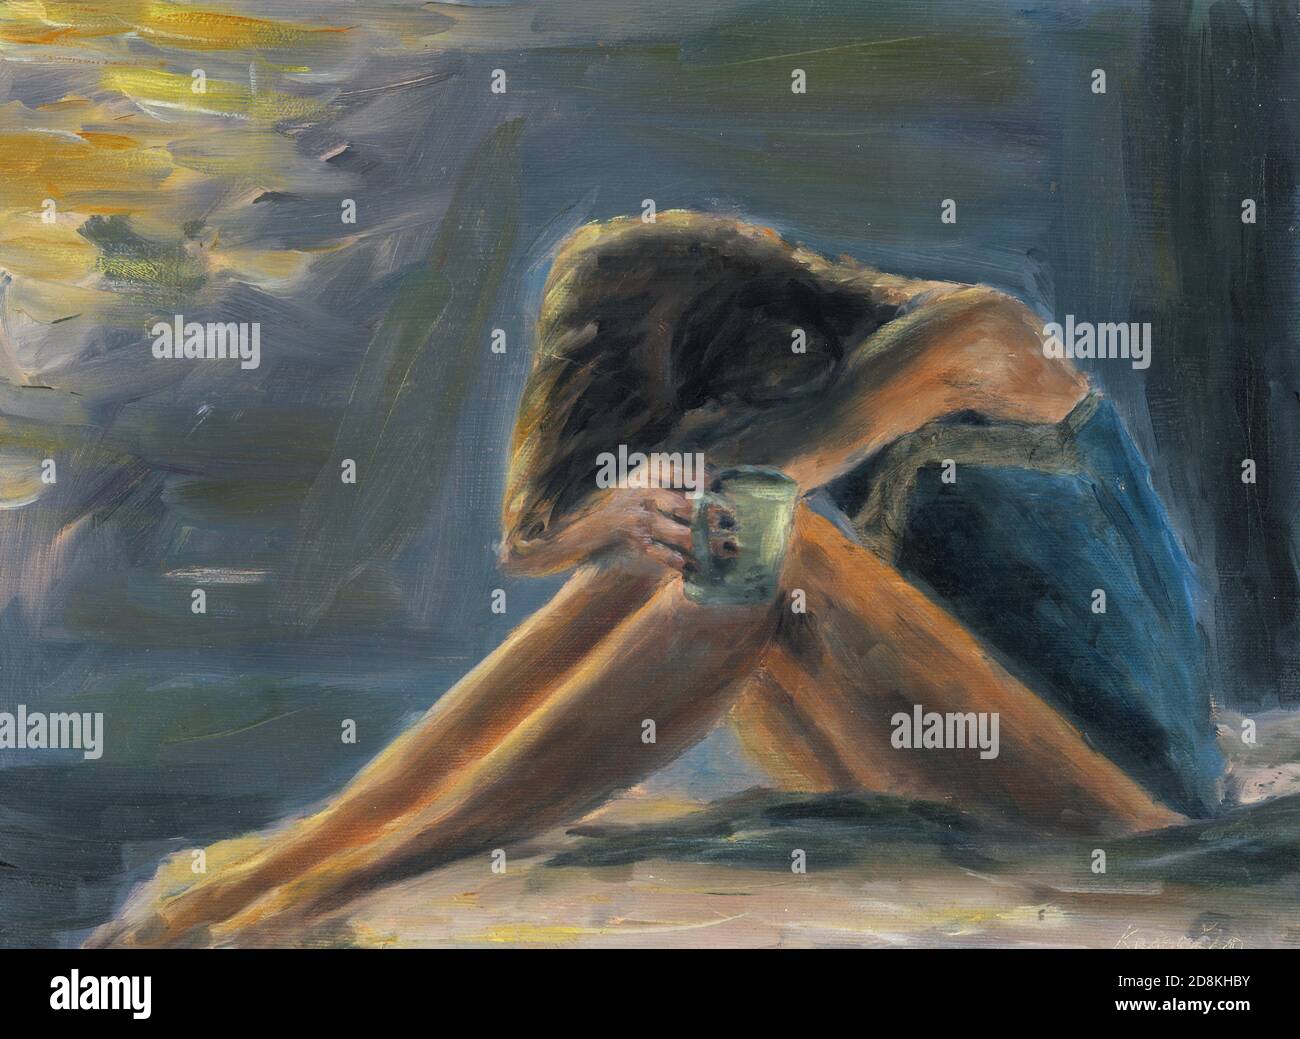 Scan of an original oil painting on canvas depicting a woman on bed. Stock Photo